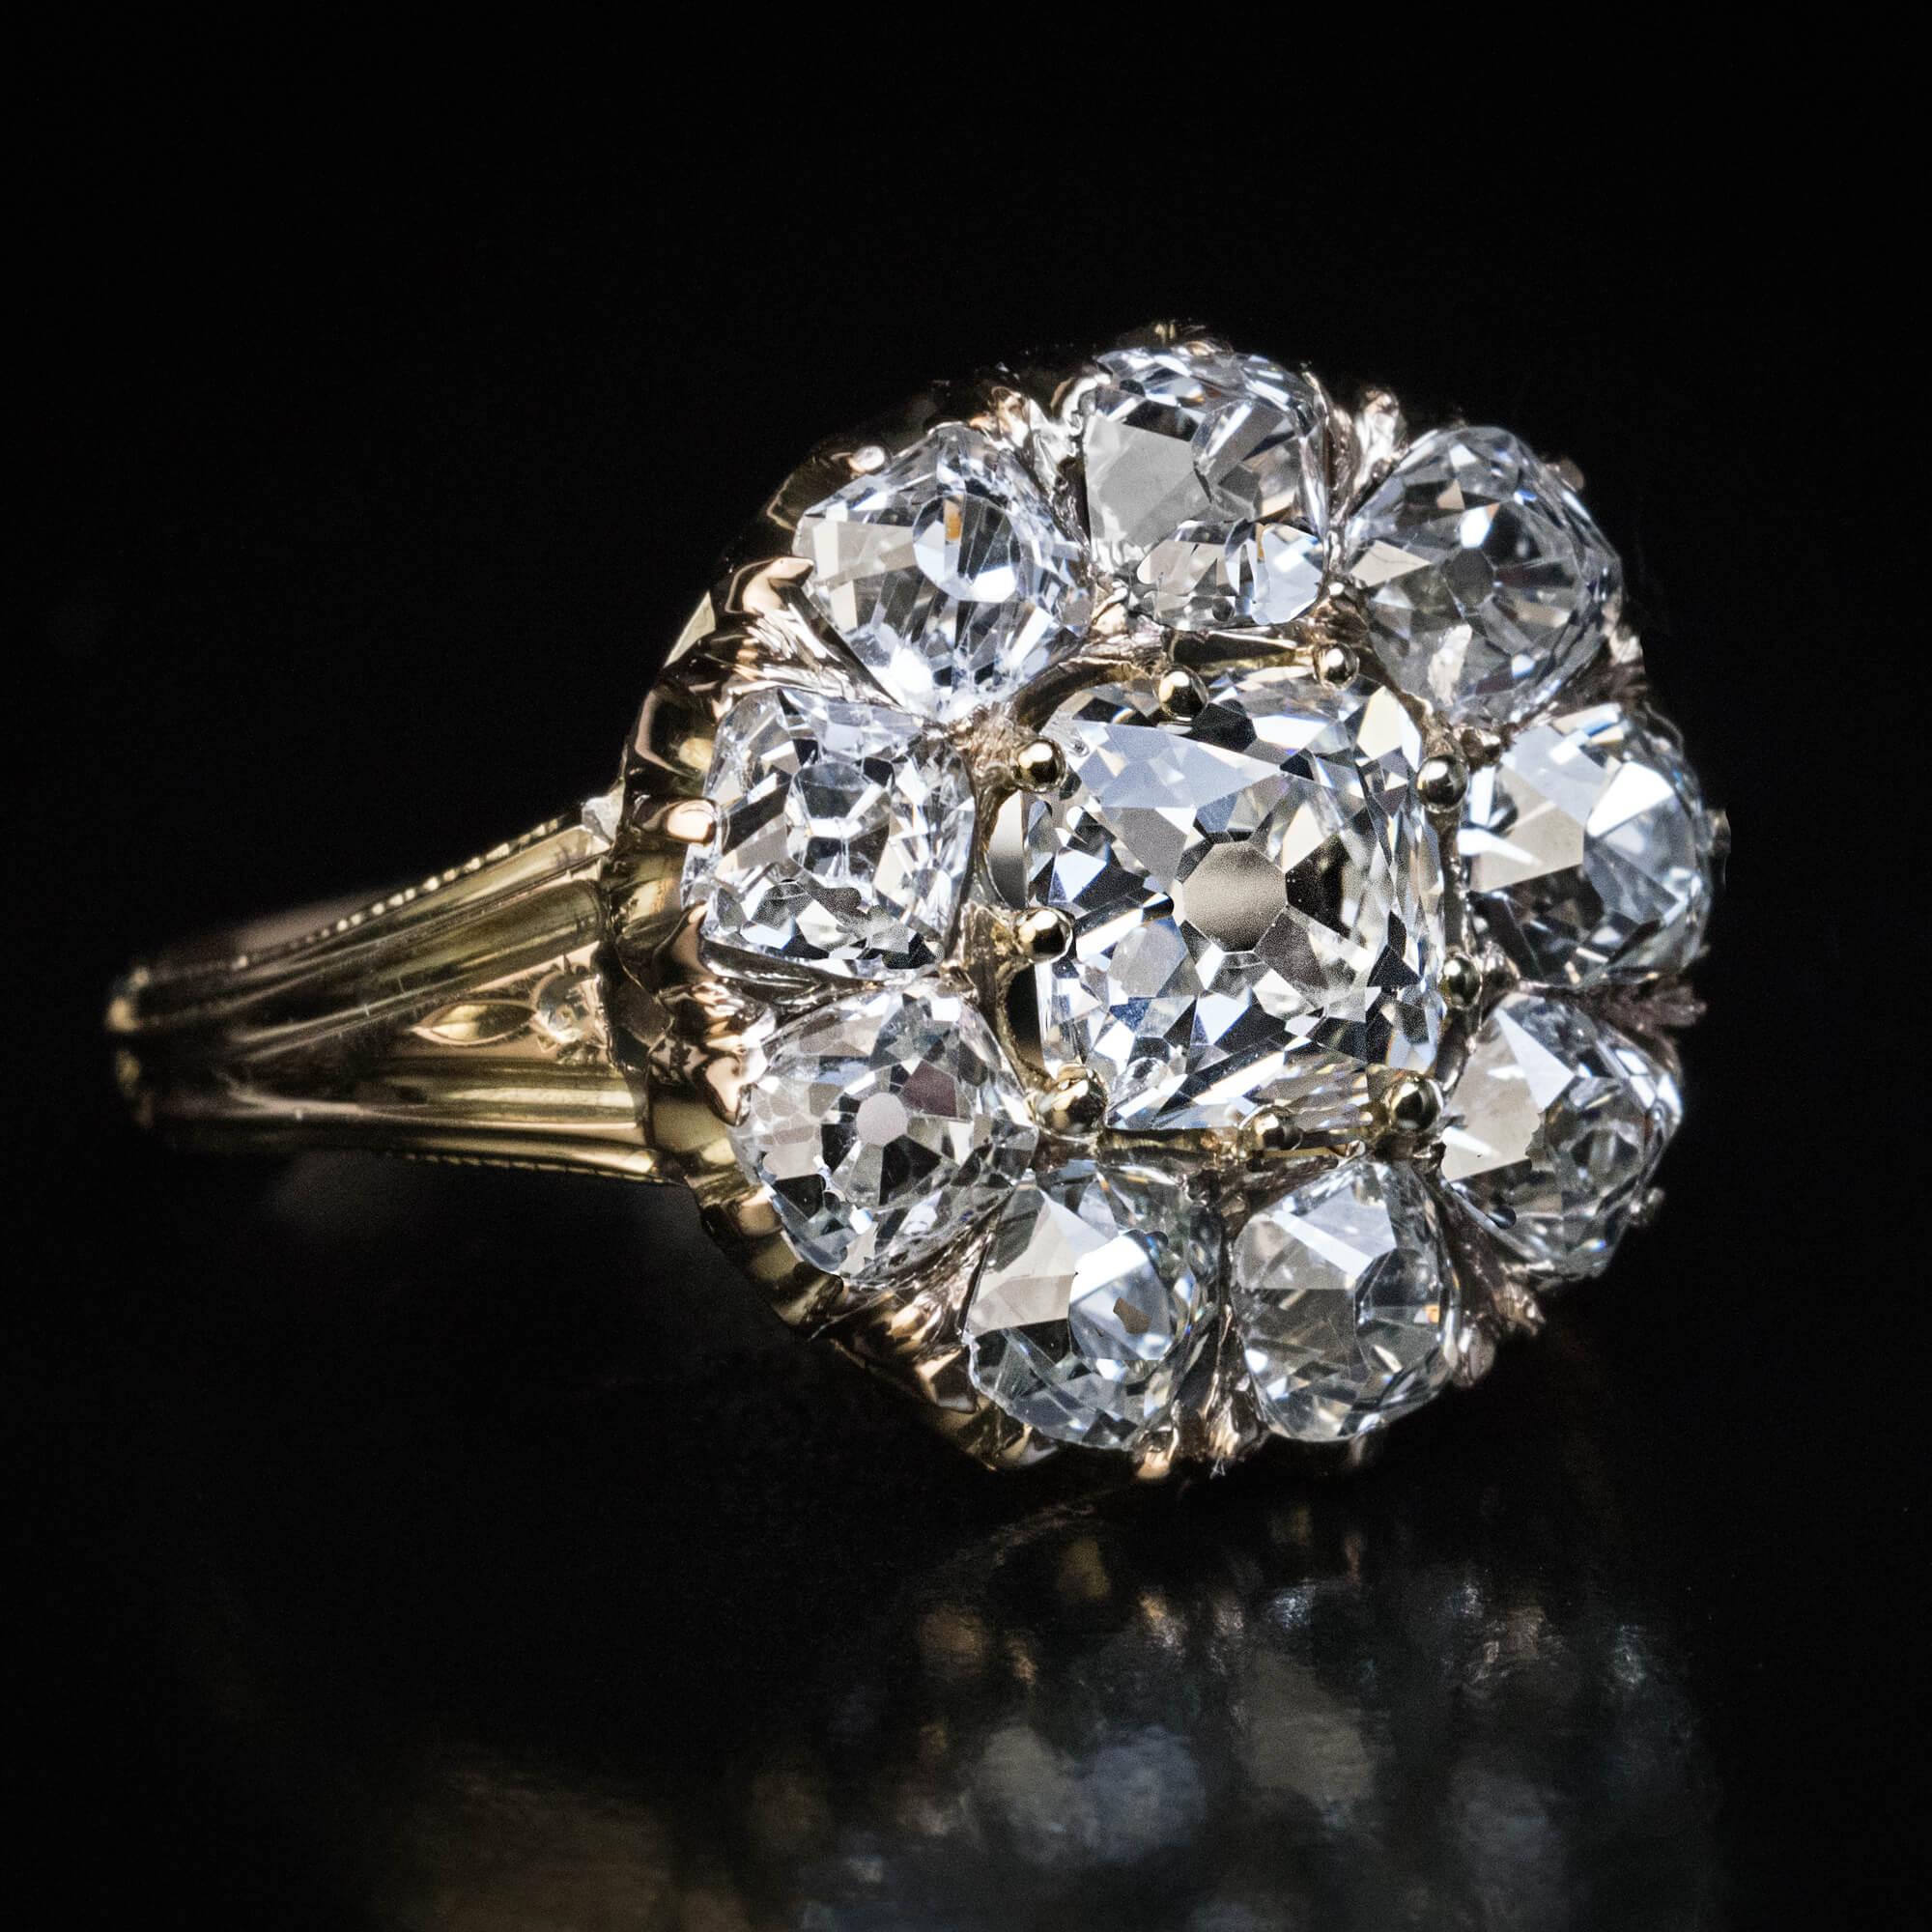 Circa 1880  This classic Victorian era 14K gold cluster ring features chunky and very clean old cushion cut diamonds.  Weight of the principal diamond is 1.04 carats (I color, VS1 clarity).  The center stone is surrounded by nine sparkling diamonds